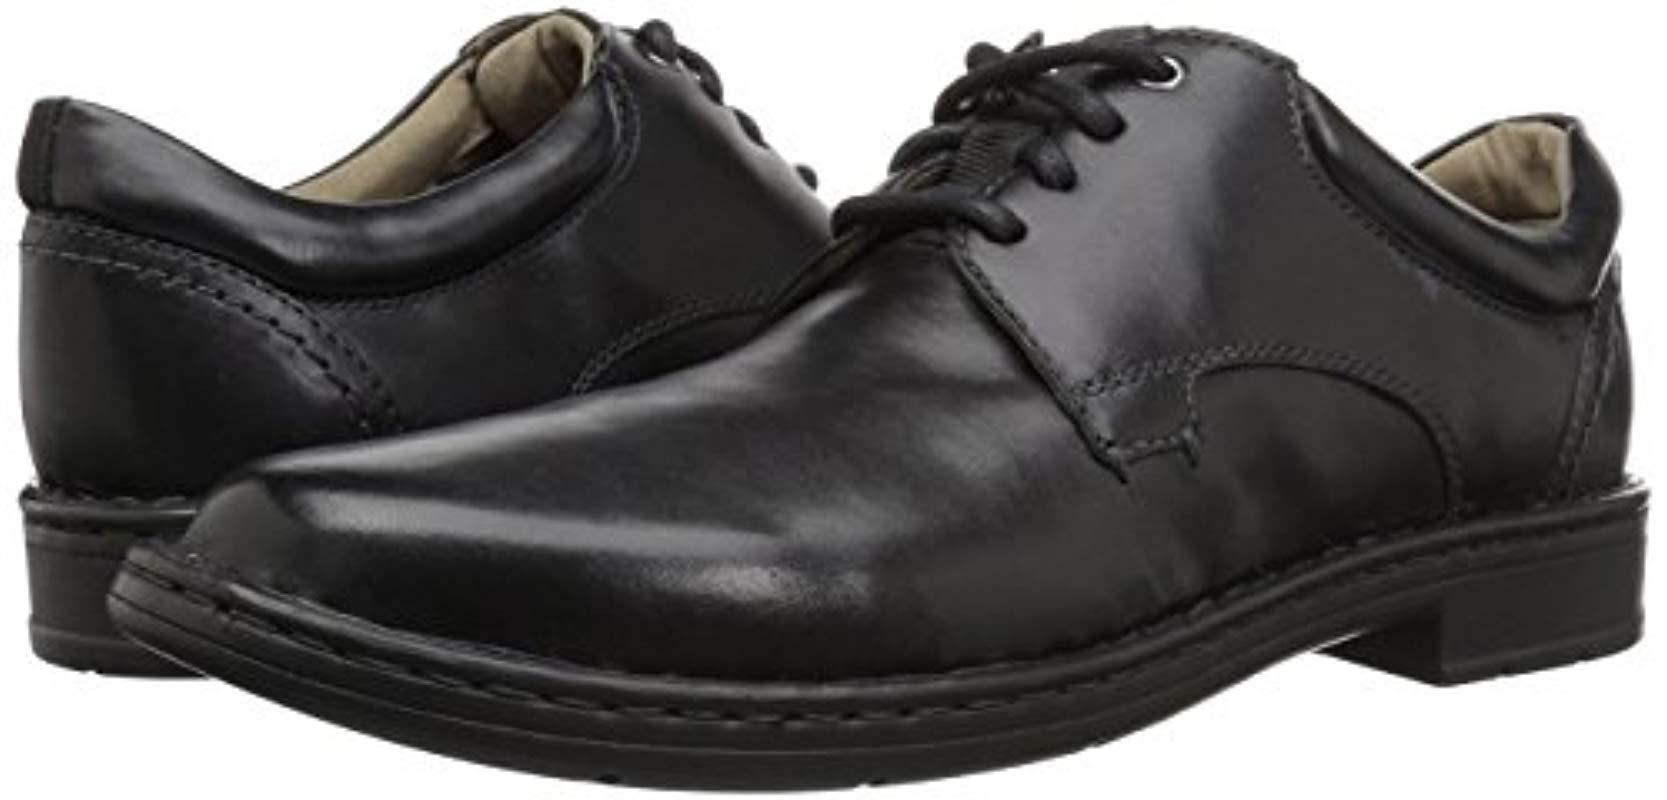 Clarks Leather Gadson Plain Oxford in 